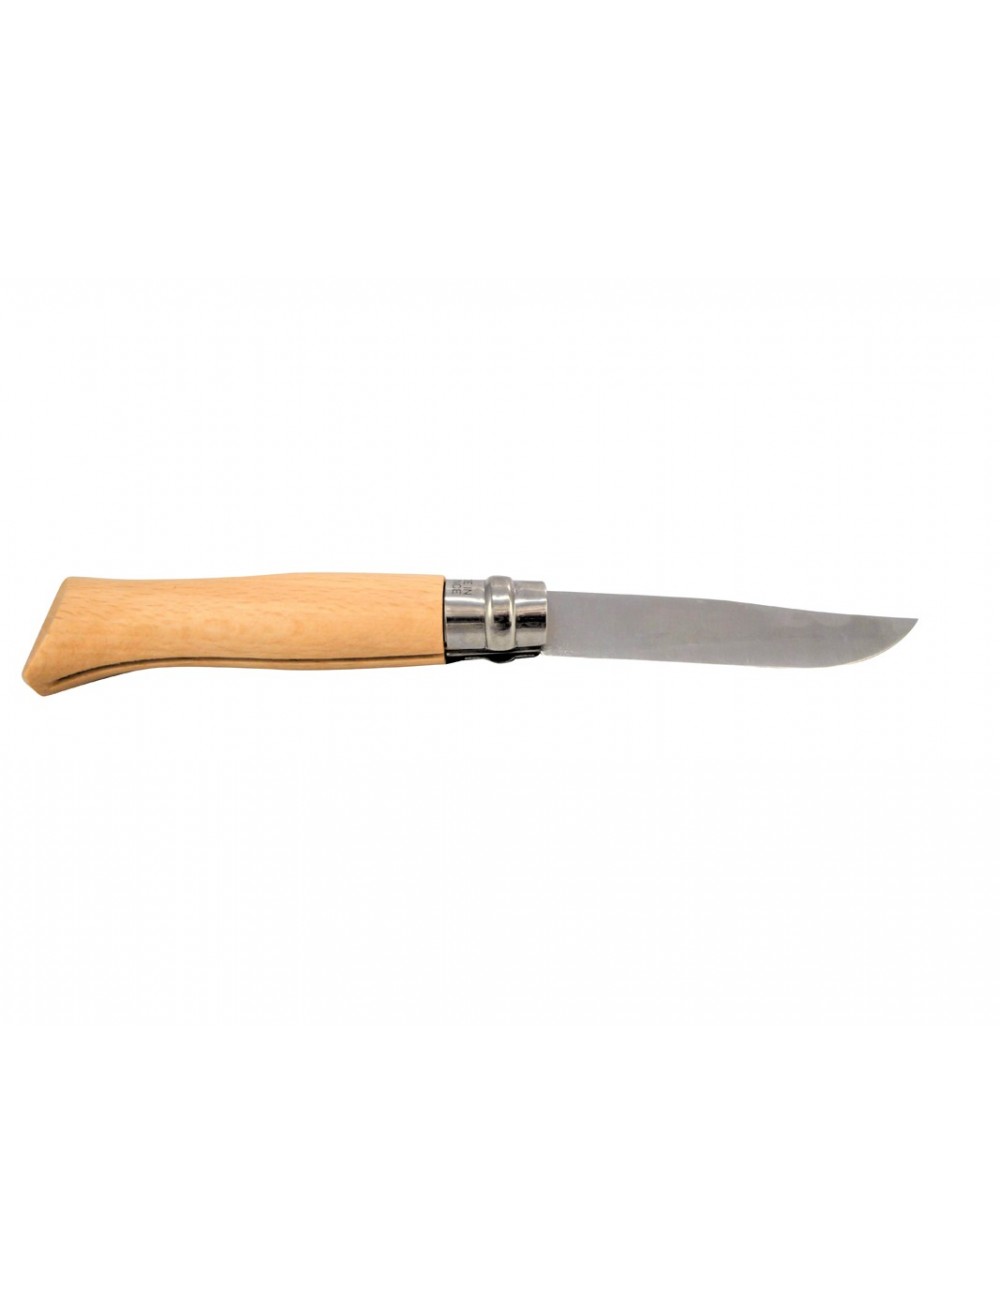 OPINEL NO. 8 KNIFE - STAINLESS STEEL